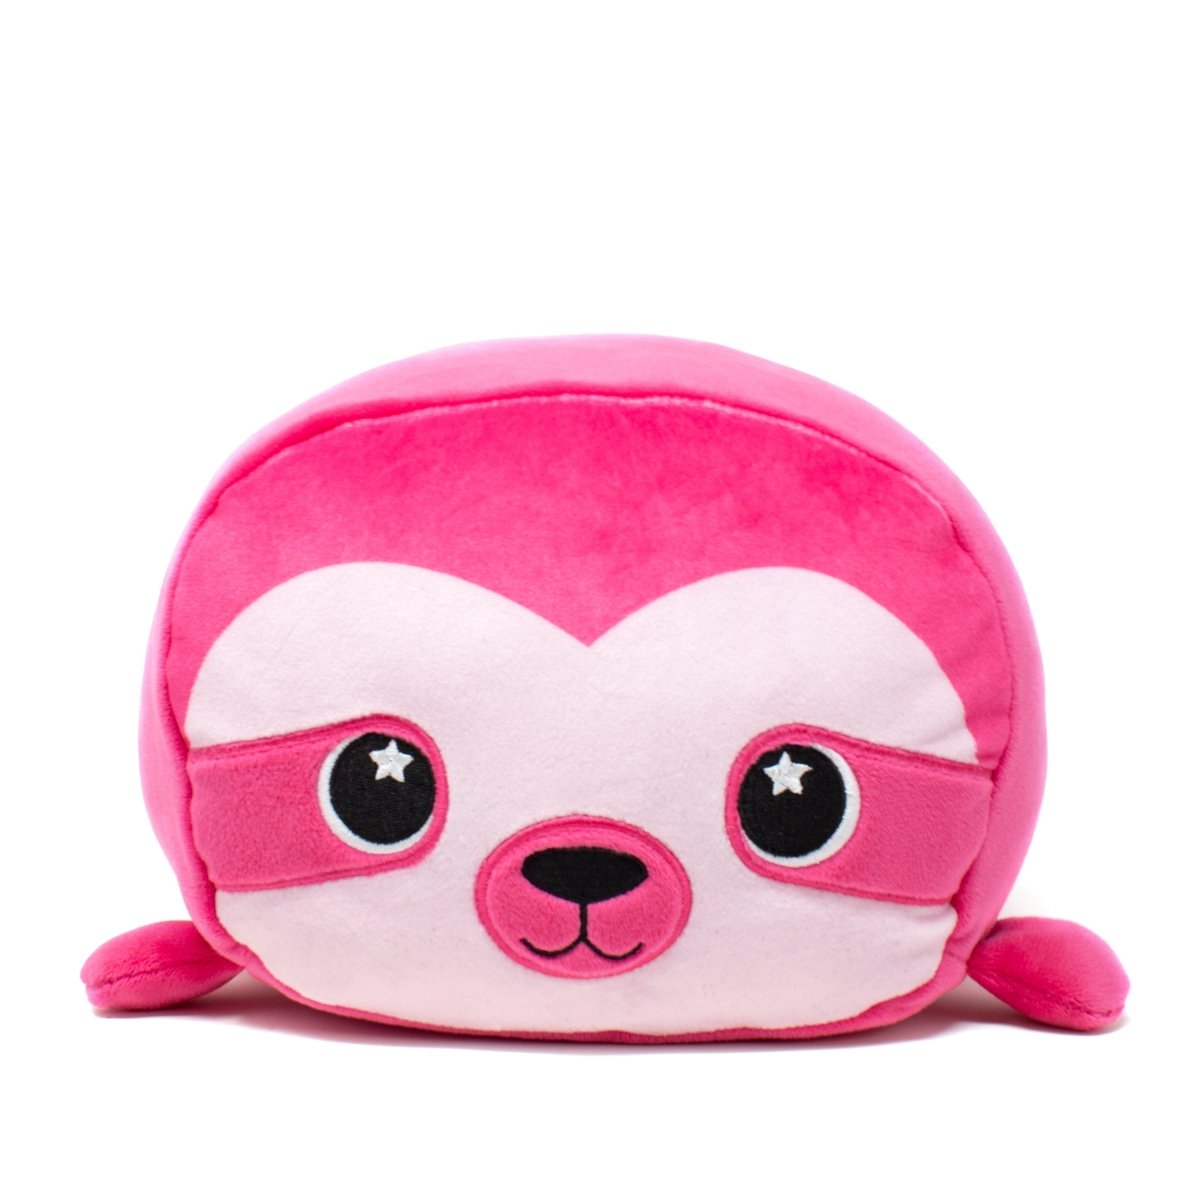 Pink Sloth Stuffed Animal with Stars in Eyes